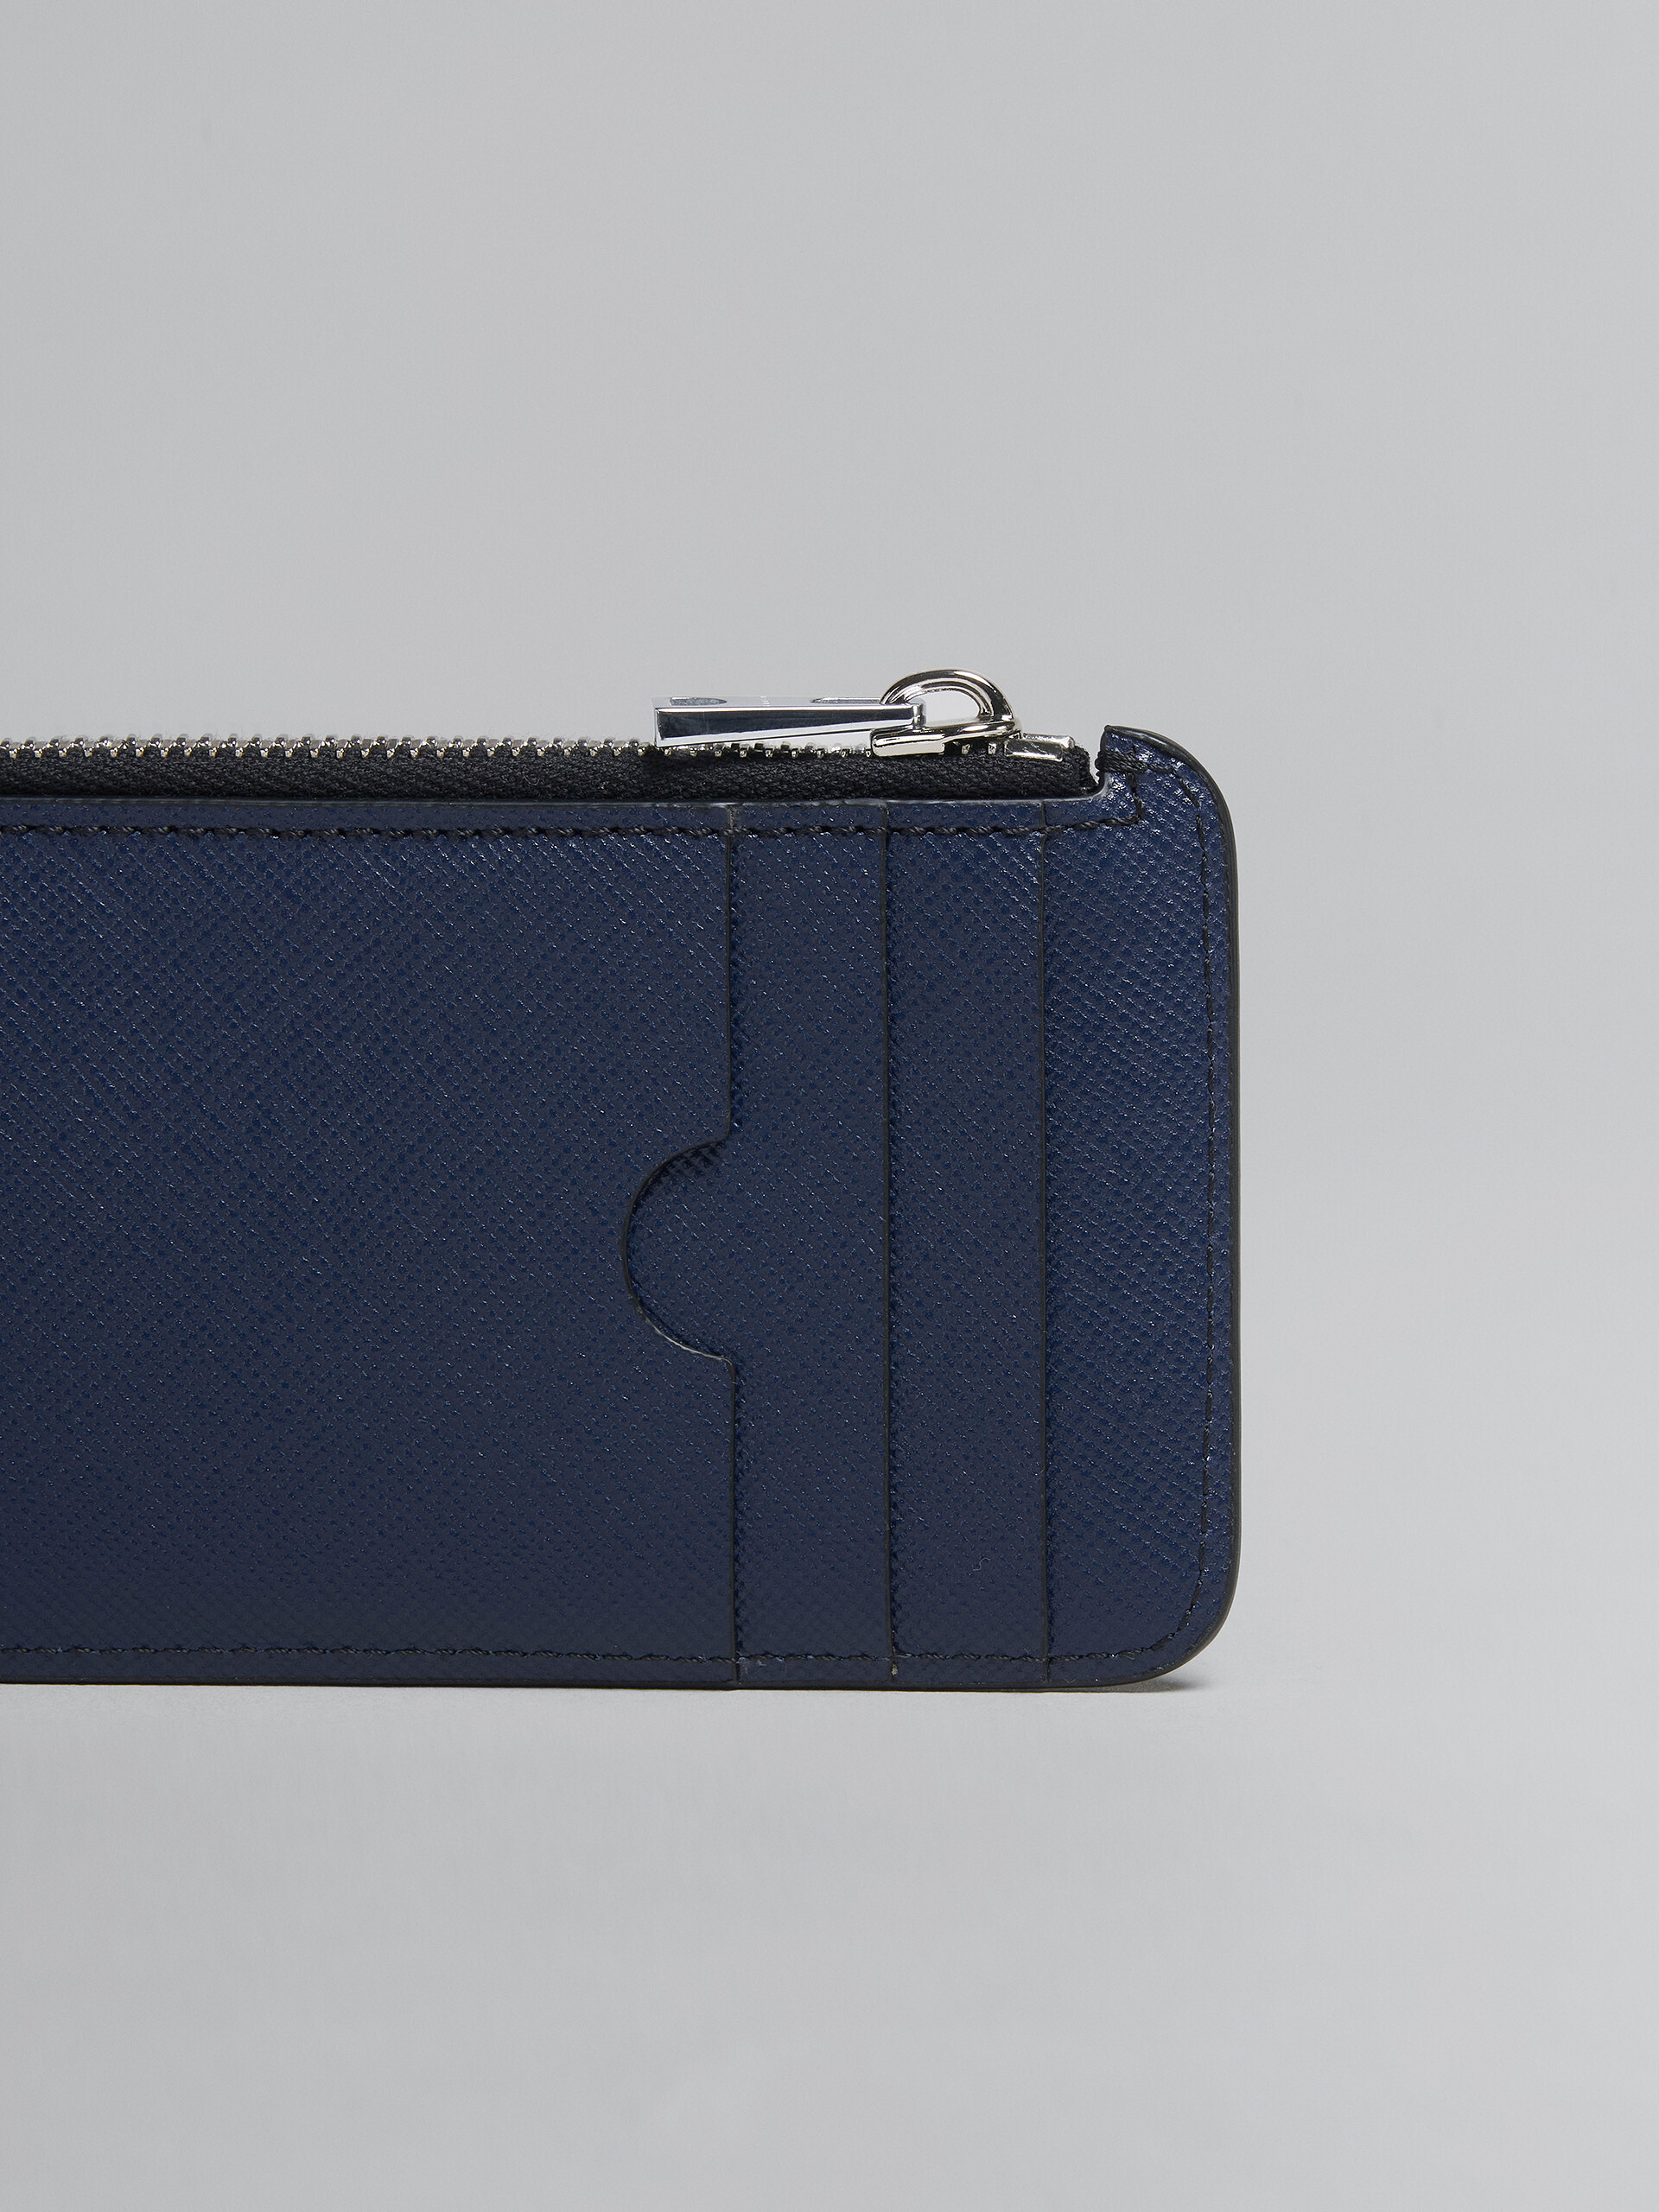 Marni Plain Logo Leather Zipped Wallet (Wallets and Small Leather Goods,Wallets)